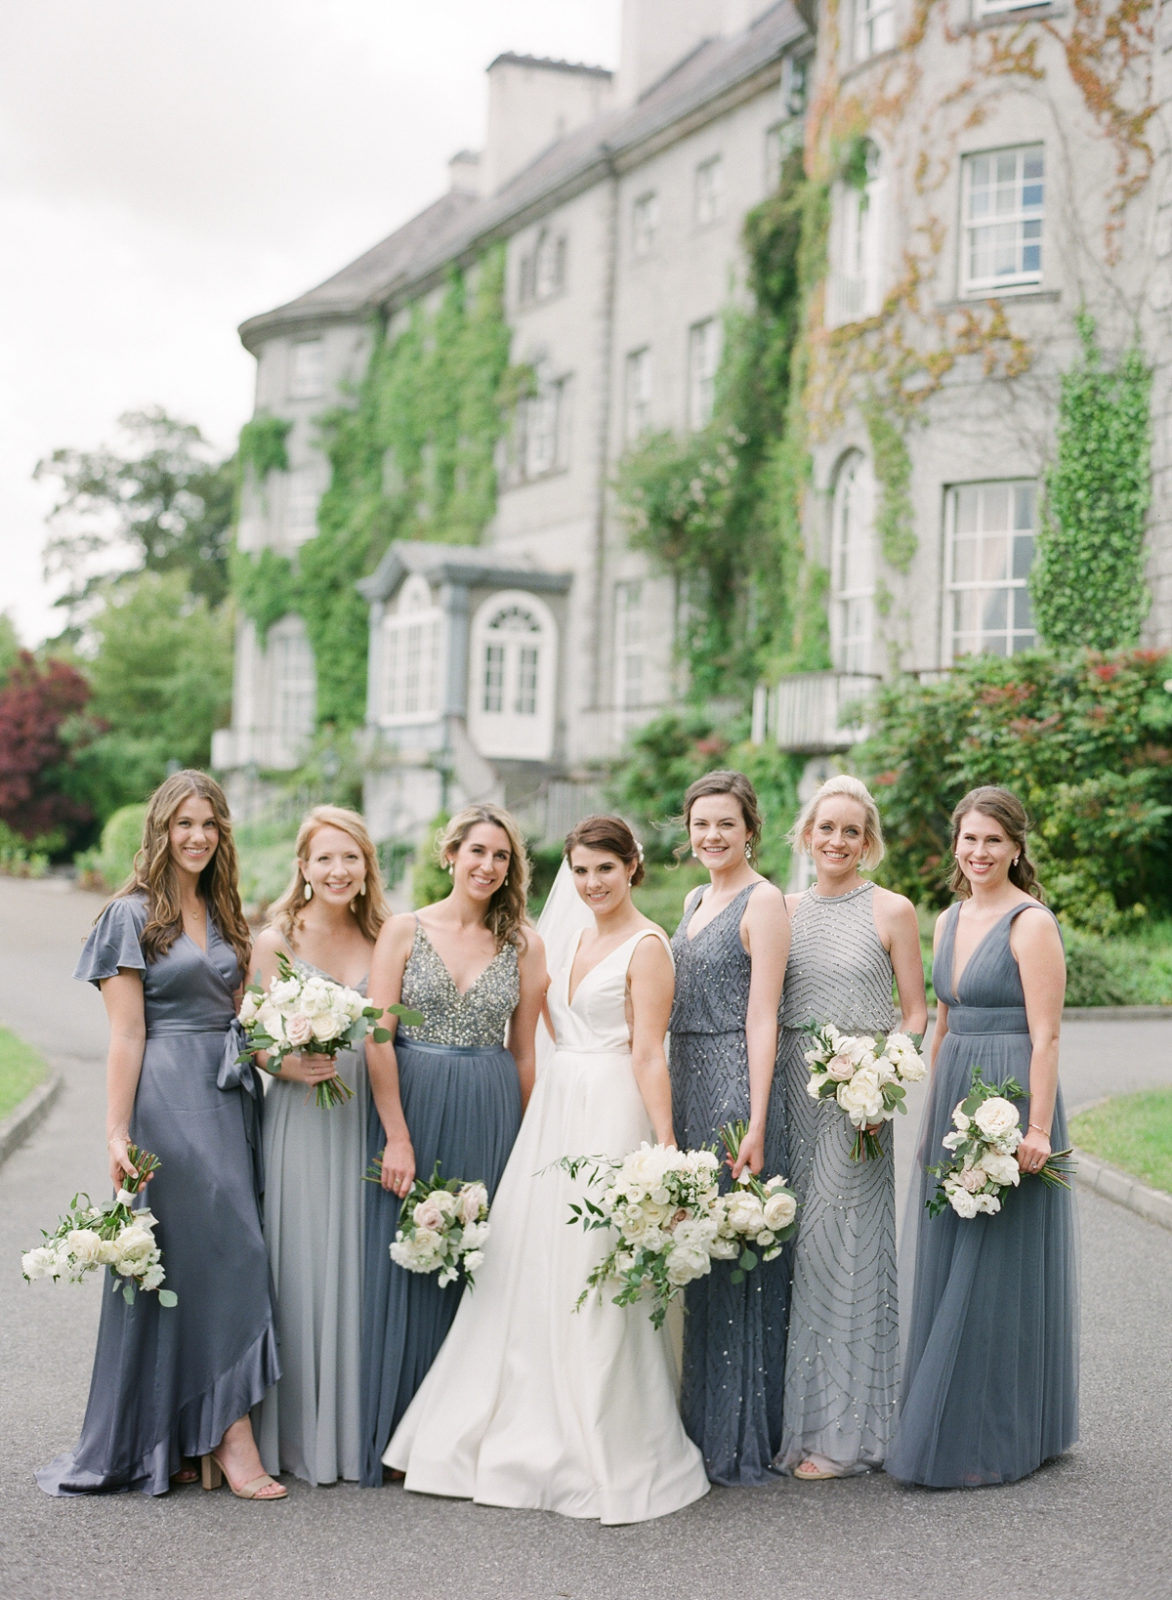 Ireland Film Photographer | Molly Carr Photography | Bride in White Jenny Yoo Dress and Bridesmaids in Grey Mismatched Bhldn Gowns with White Bridal Bouquets at Mount Juliet Estate